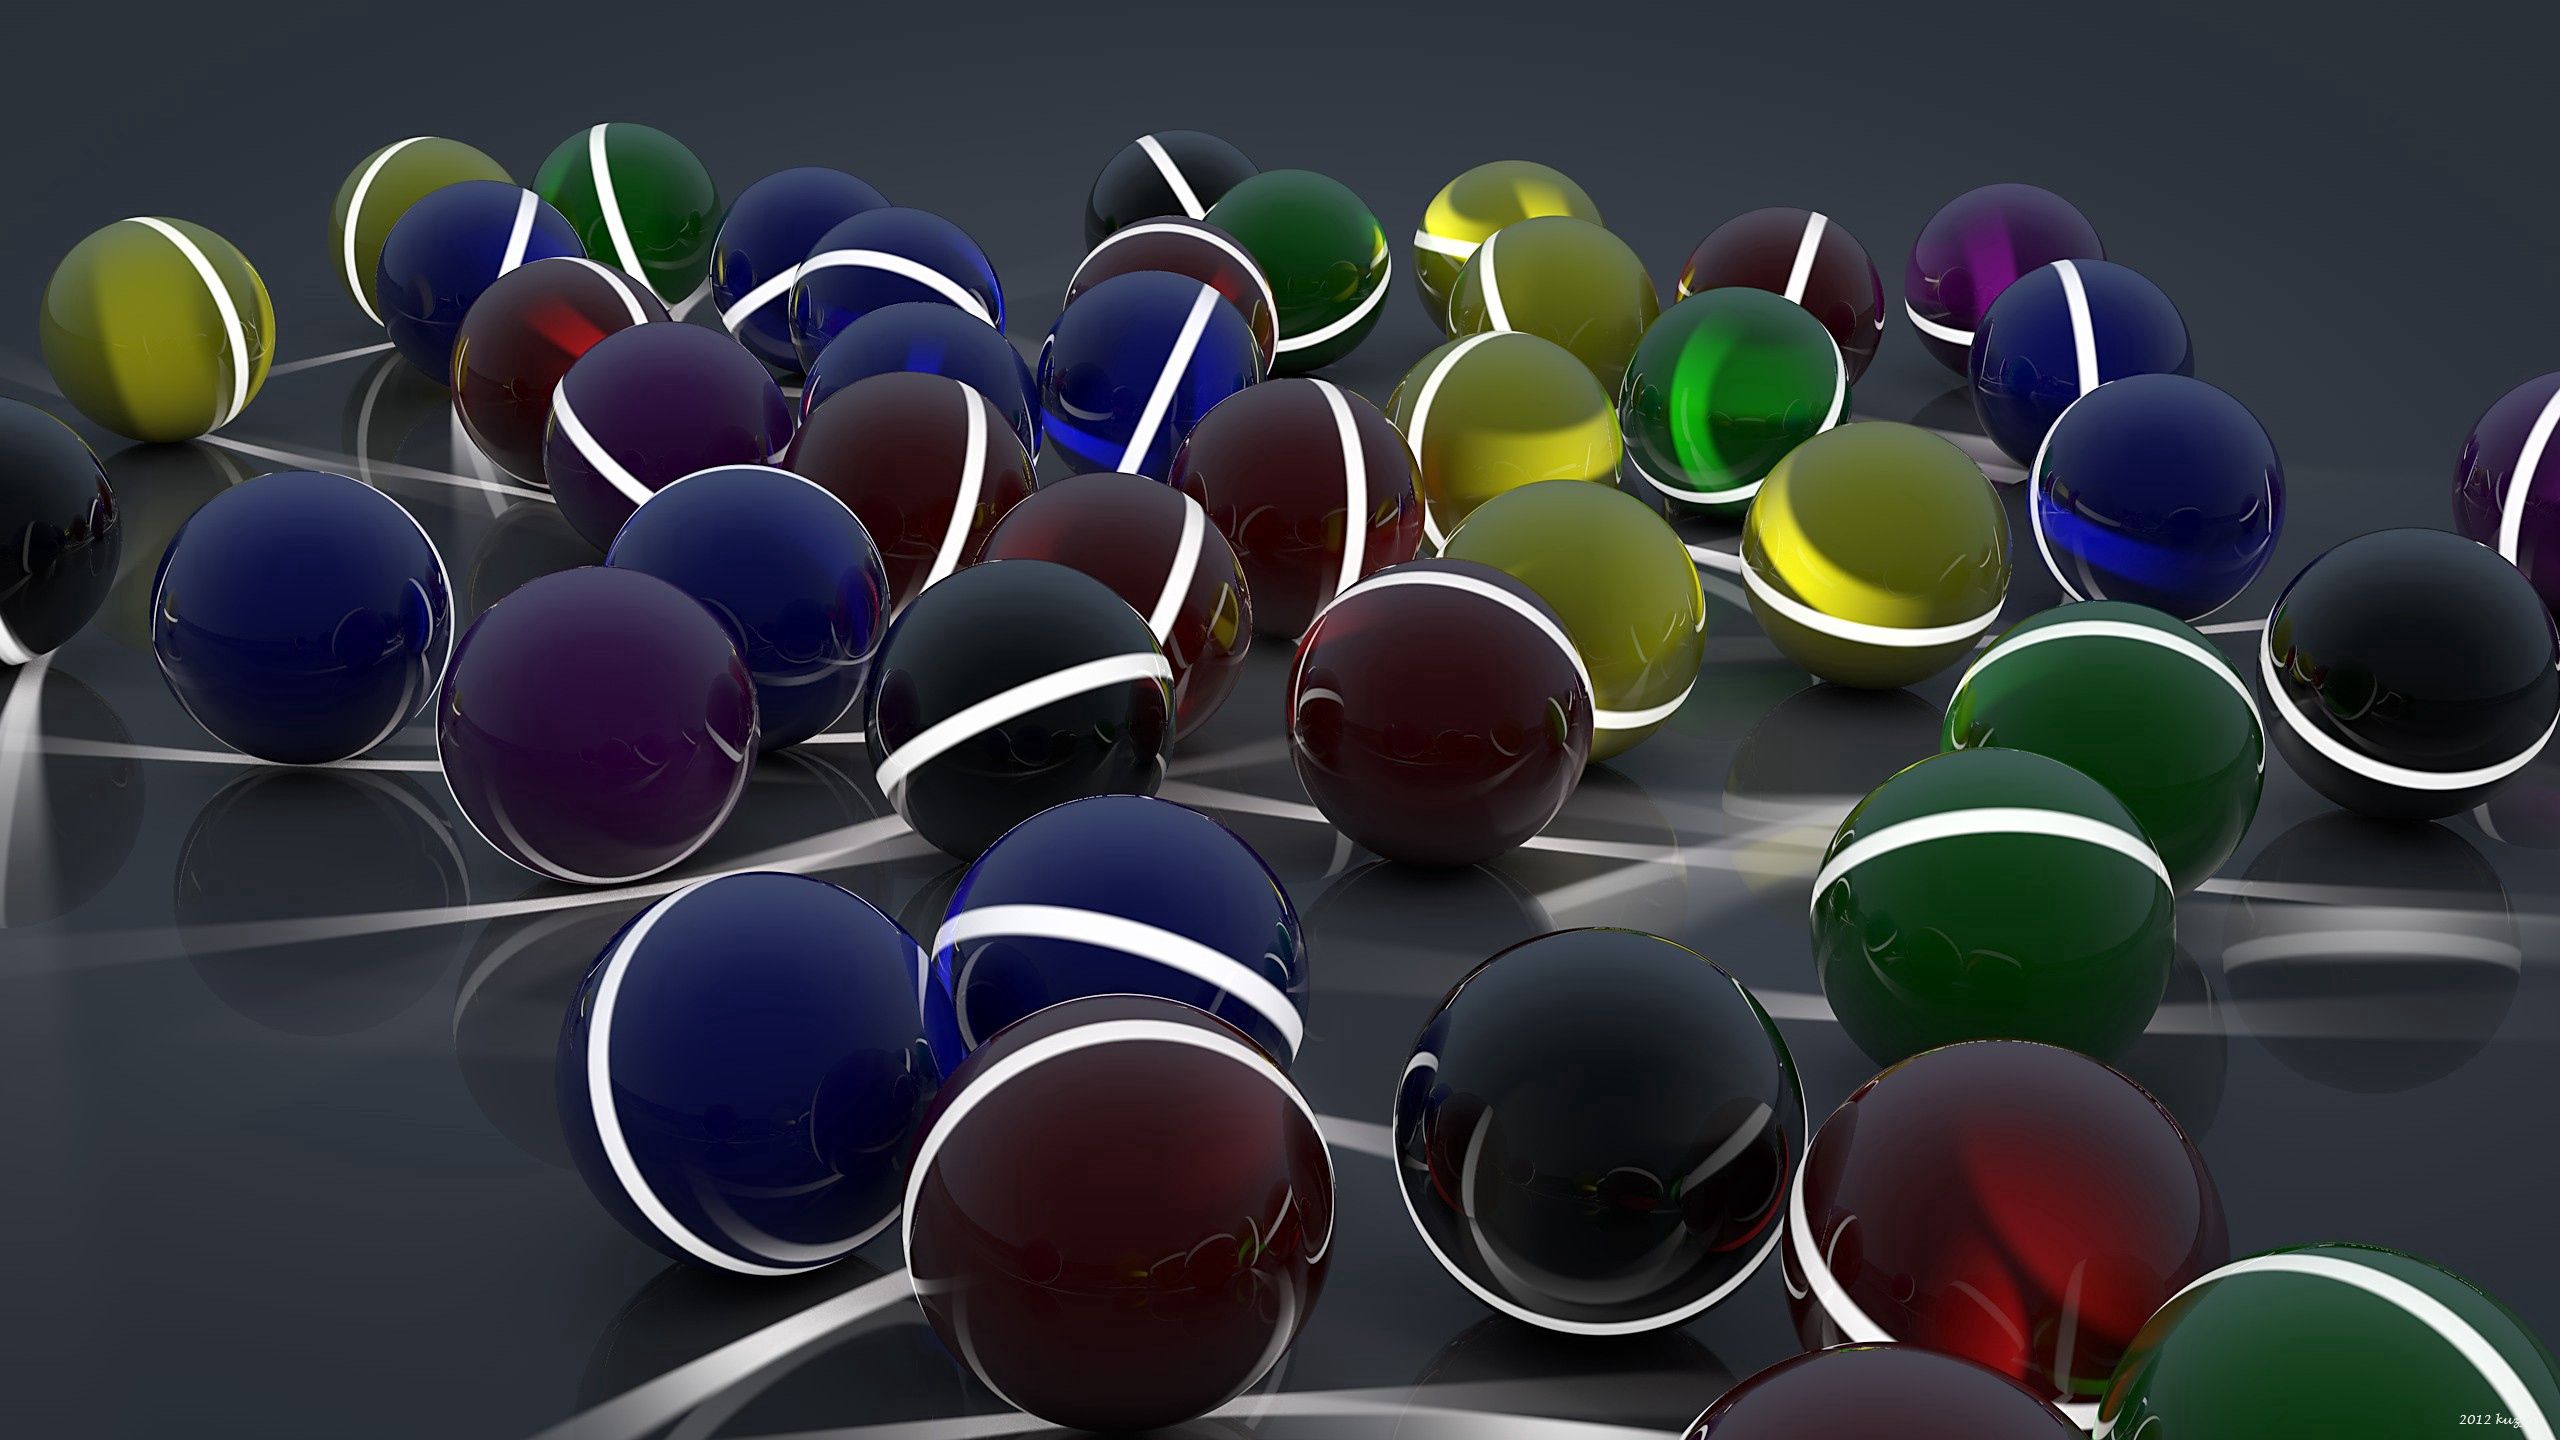 3d, glow, surface, balls, lots of, multitude images